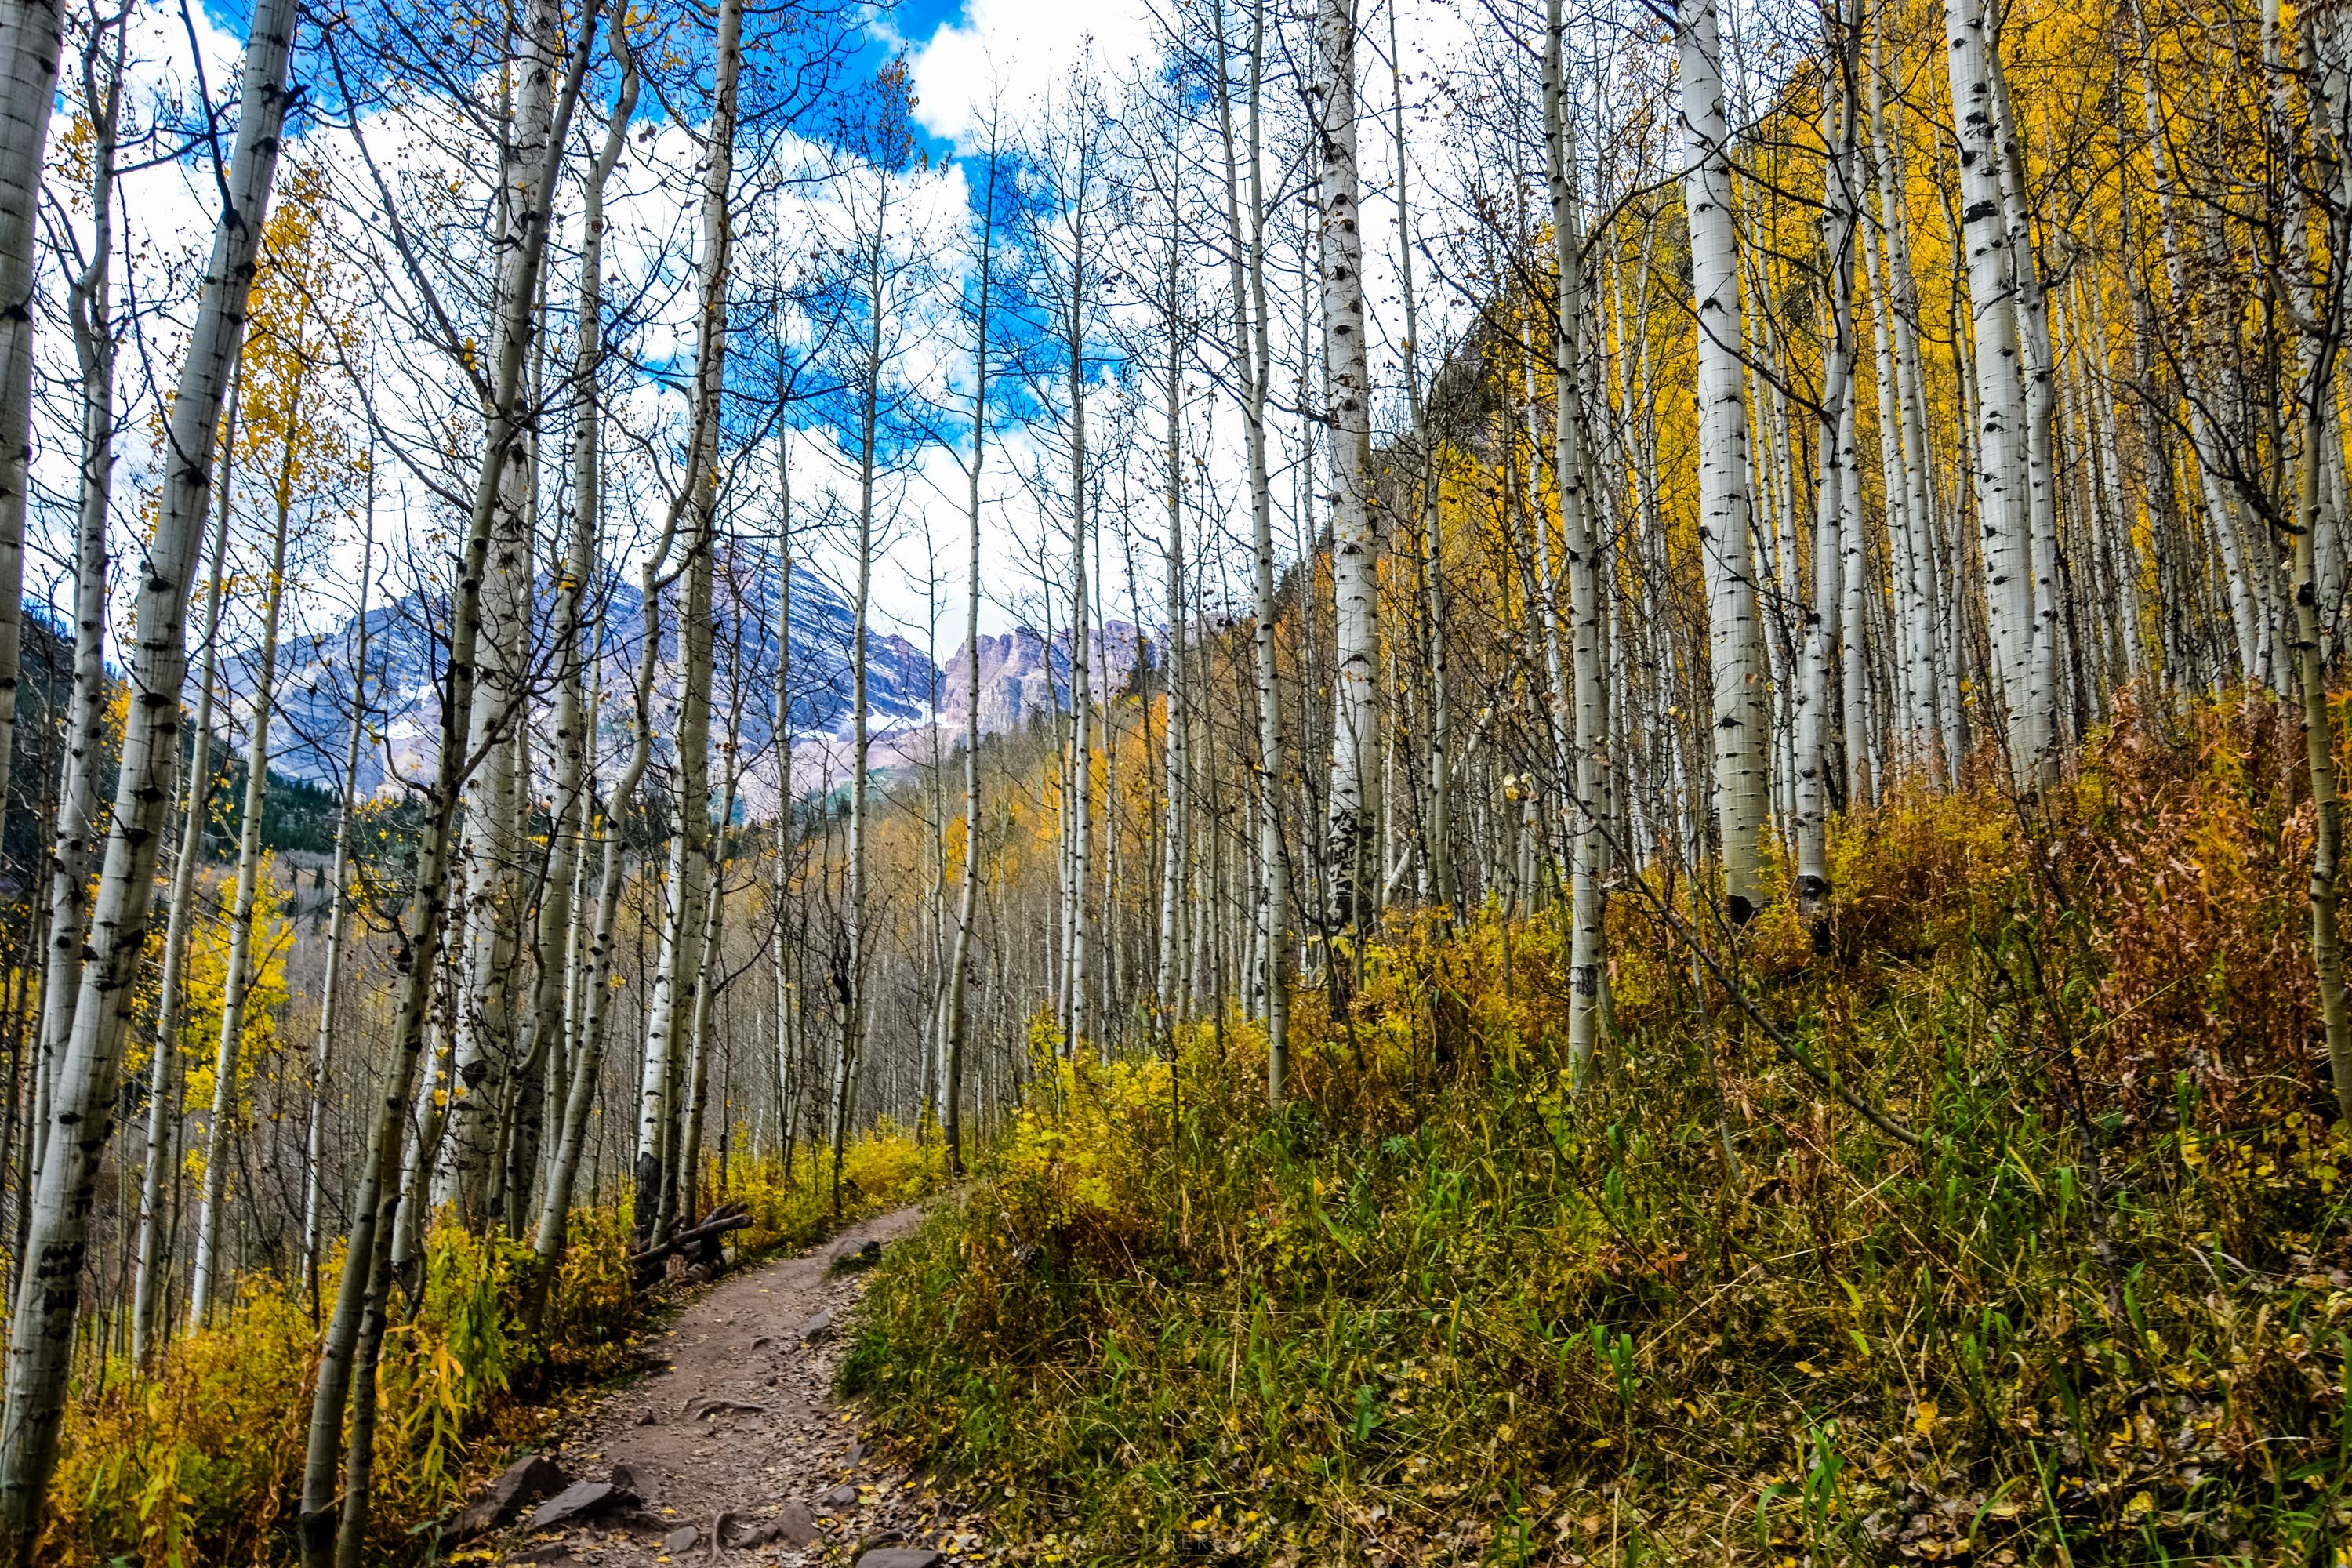 I passed through this glorious forest while hiking the Maroon Bells in Colorado